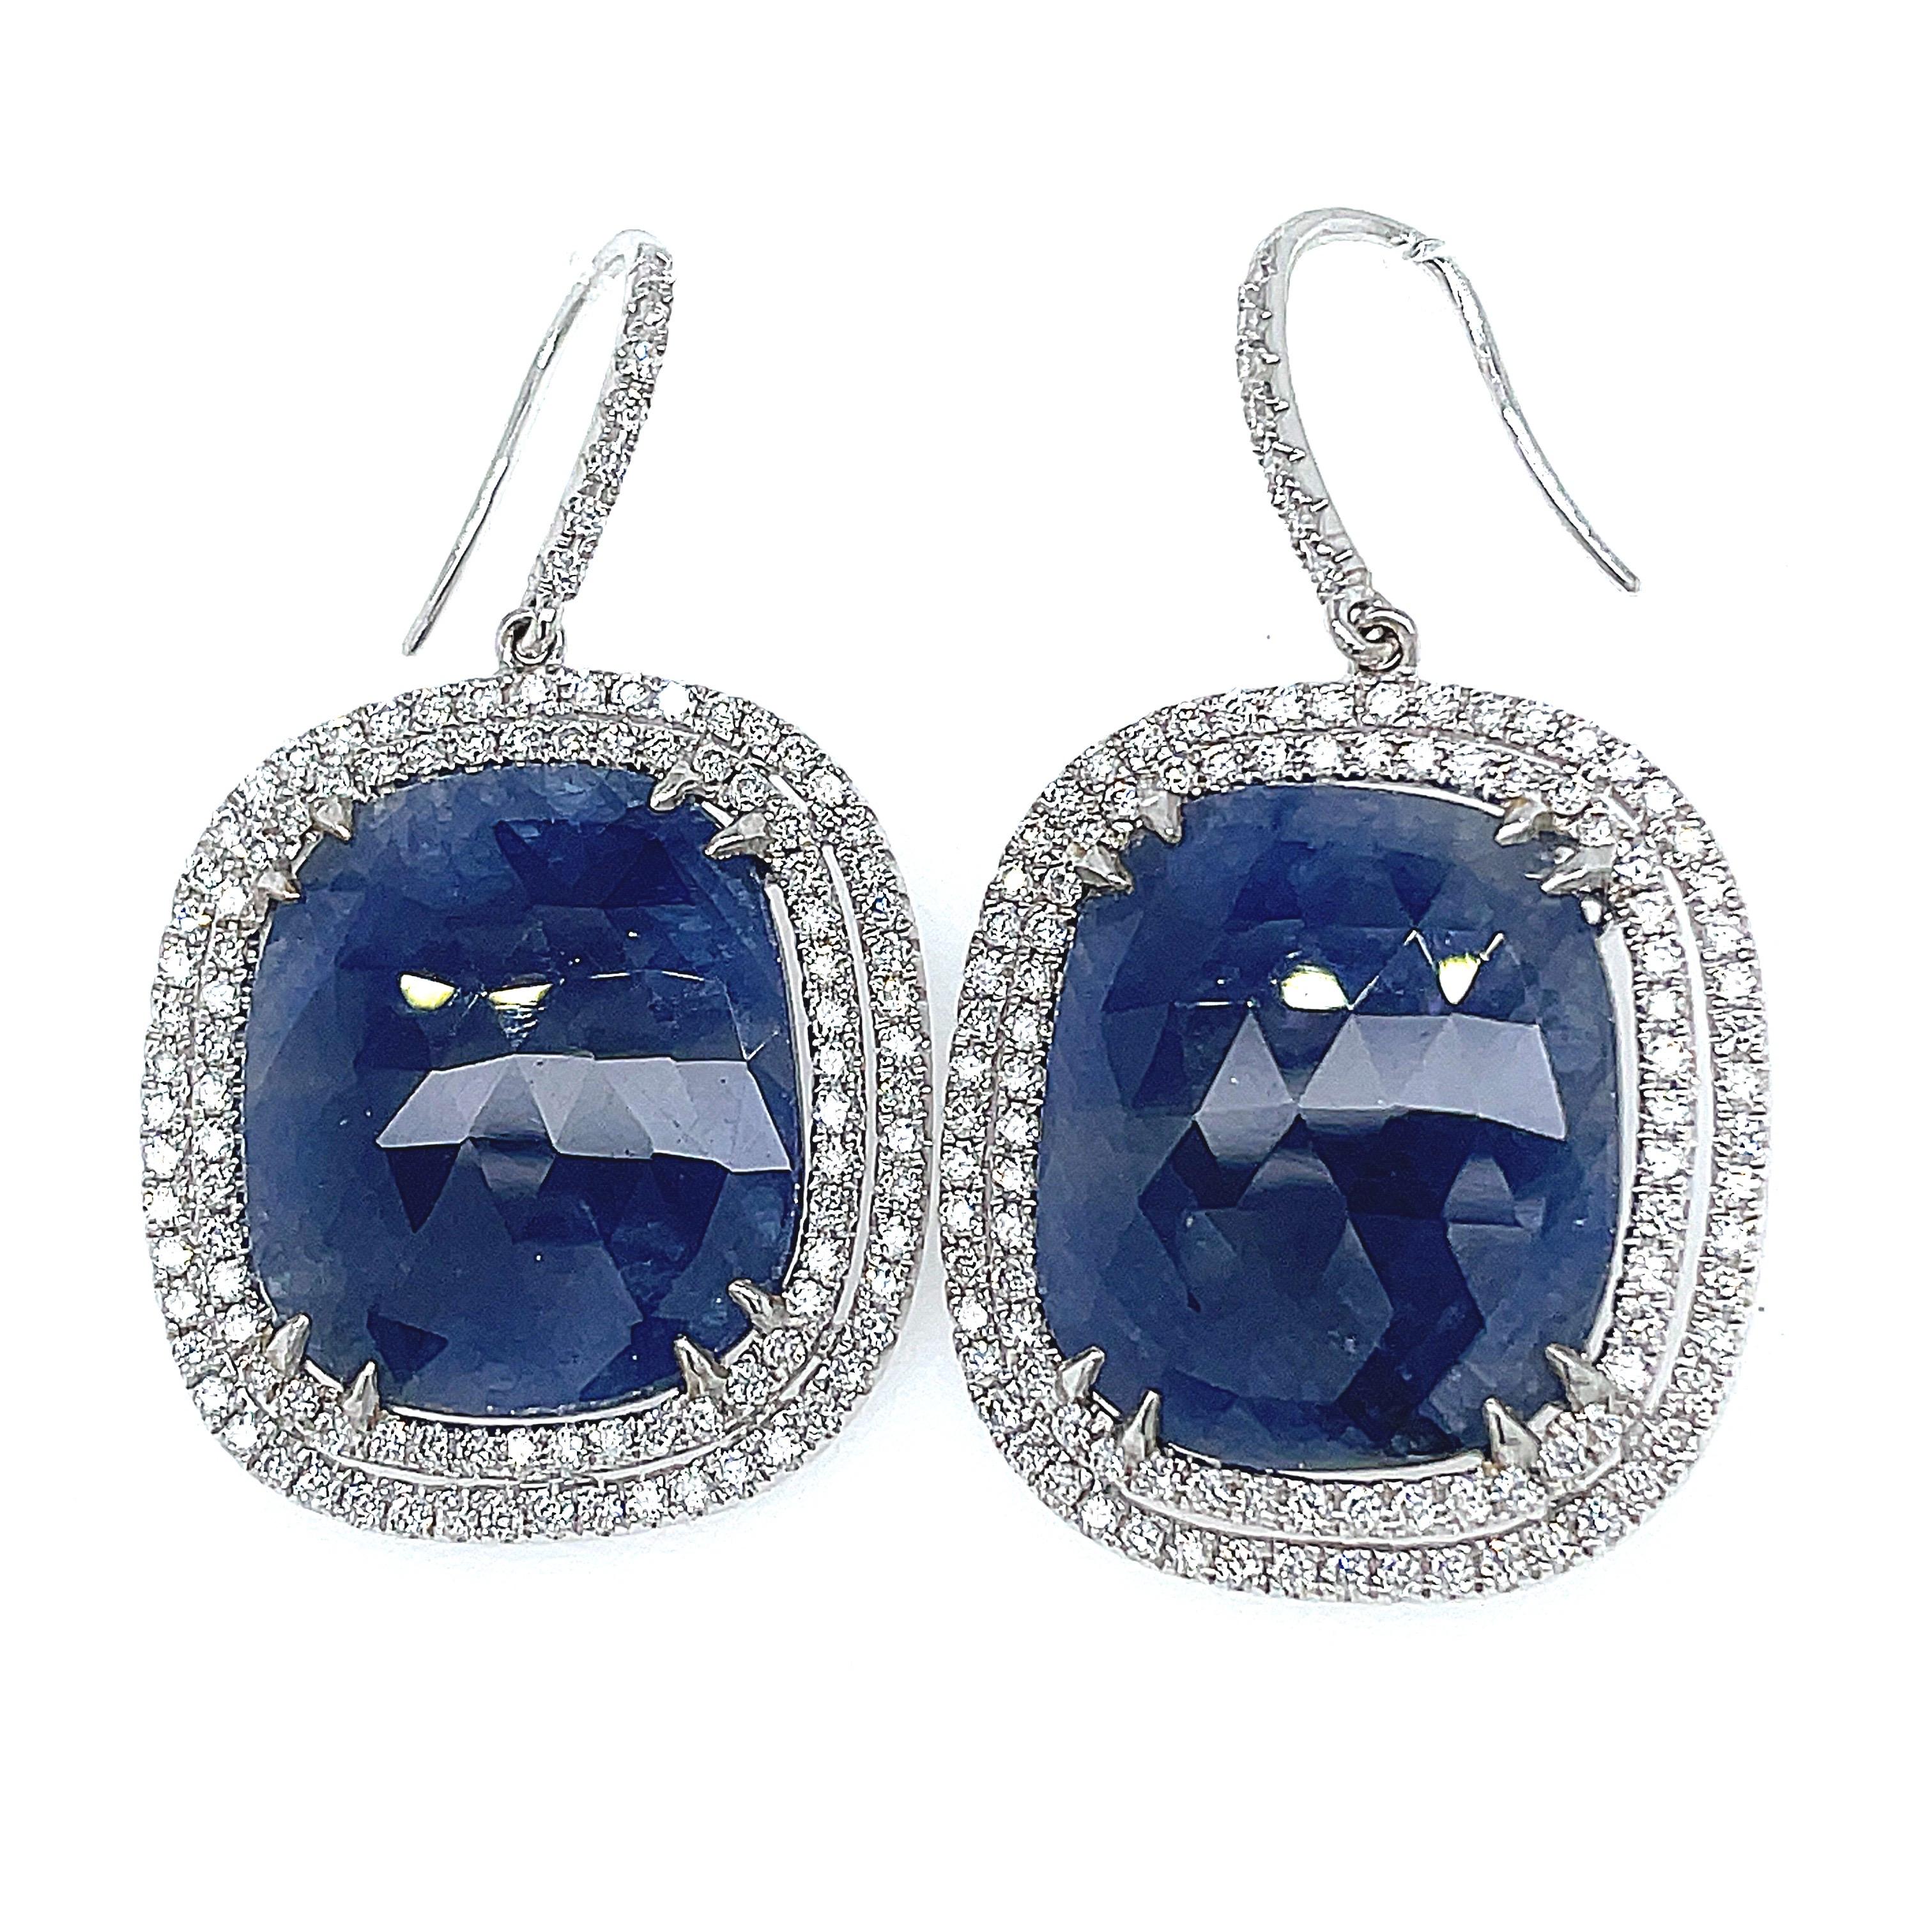 No heat Burma Blue Sapphire Earrings 

This pair of extremely attractive earrings consist of a pair of matched sapphire stones from the mines in Myanmar or Burma. 

As they have only been mined and cut to shape, with no other processes added to it